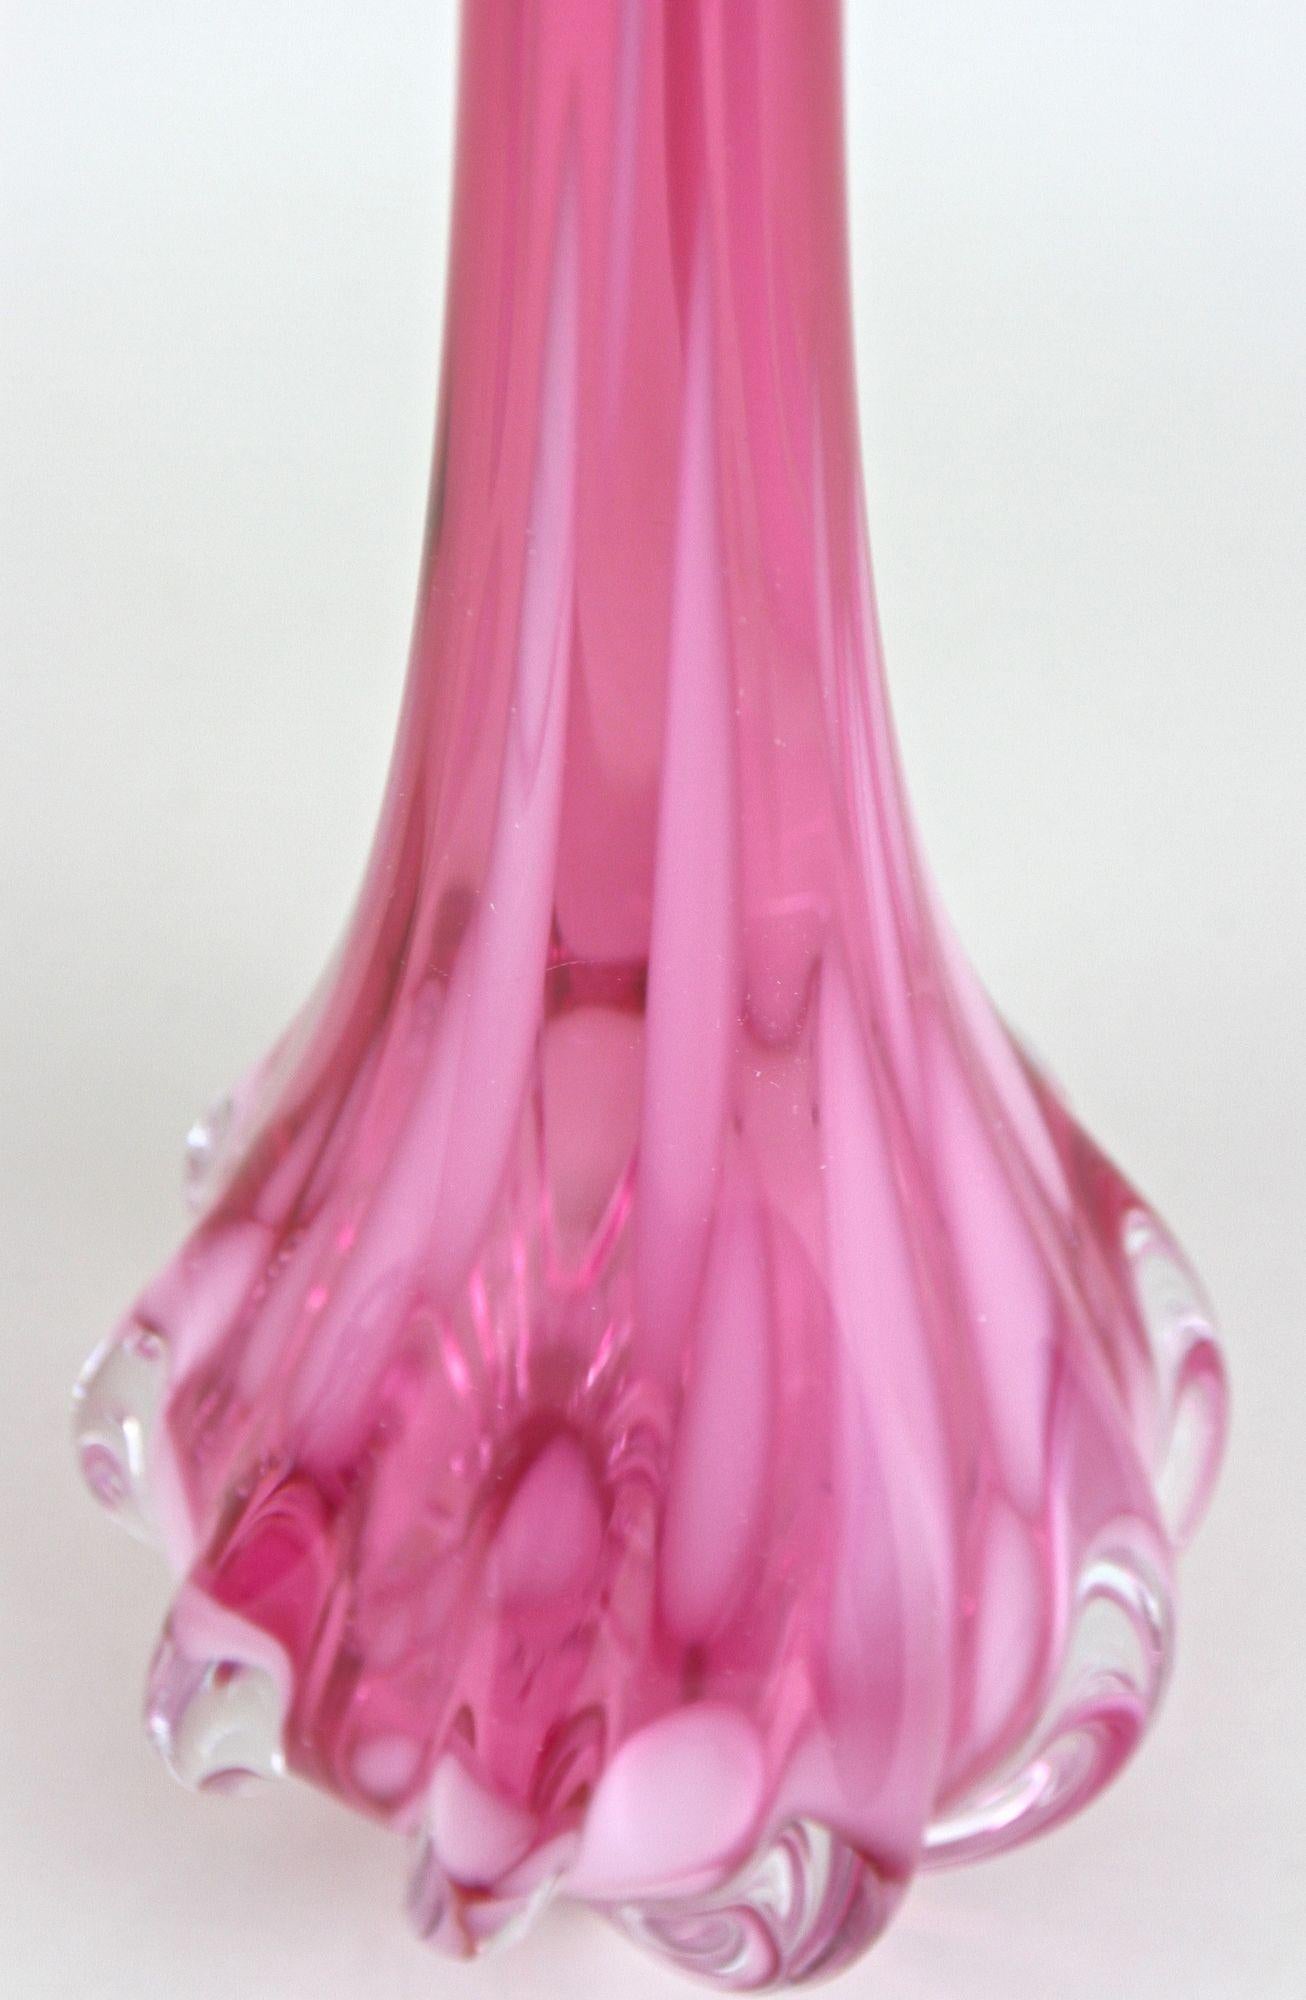 Mid-Century Modern Pink Long Neck Murano Glass Vase, 20th Century, Italy circa 1970 For Sale